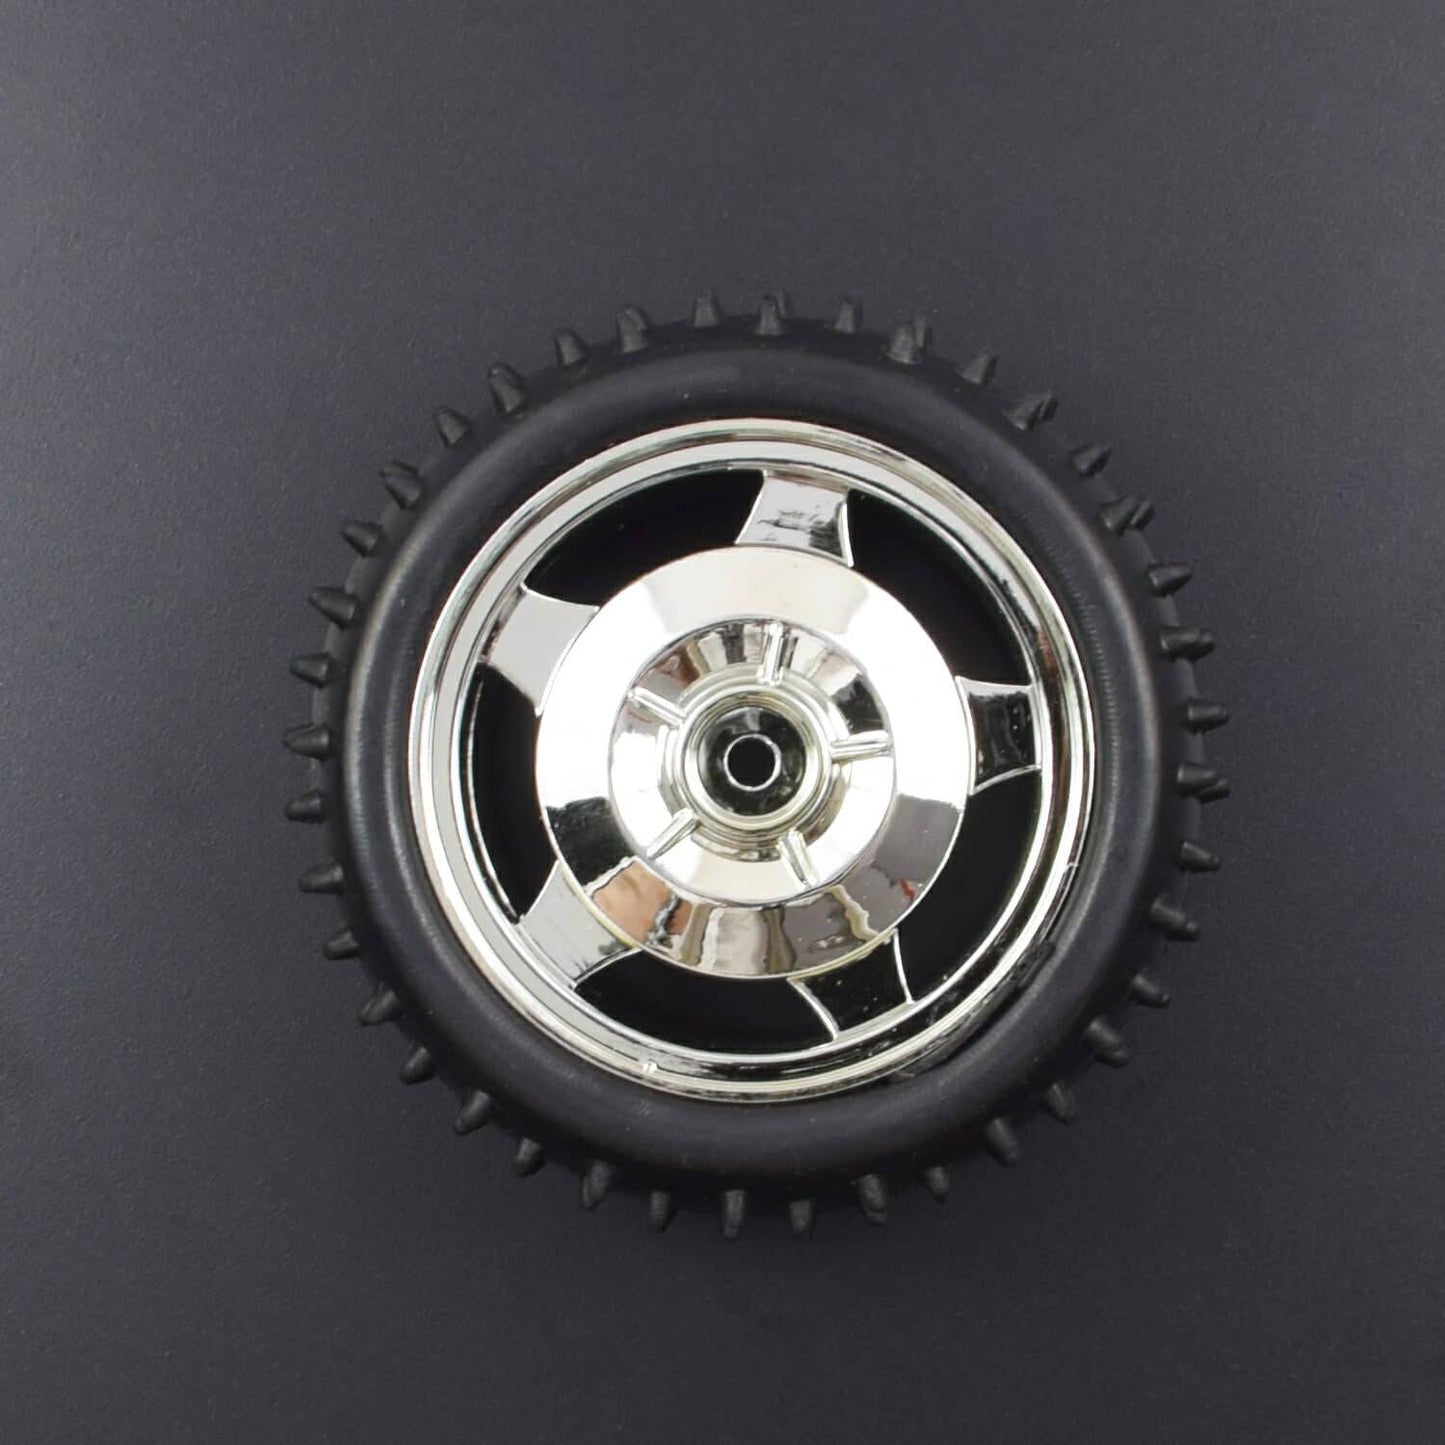 85MM Large Robot Smart Car Wheel For Arduino Robot 38MM Width Surface (Silver)- RS1984 - REES52